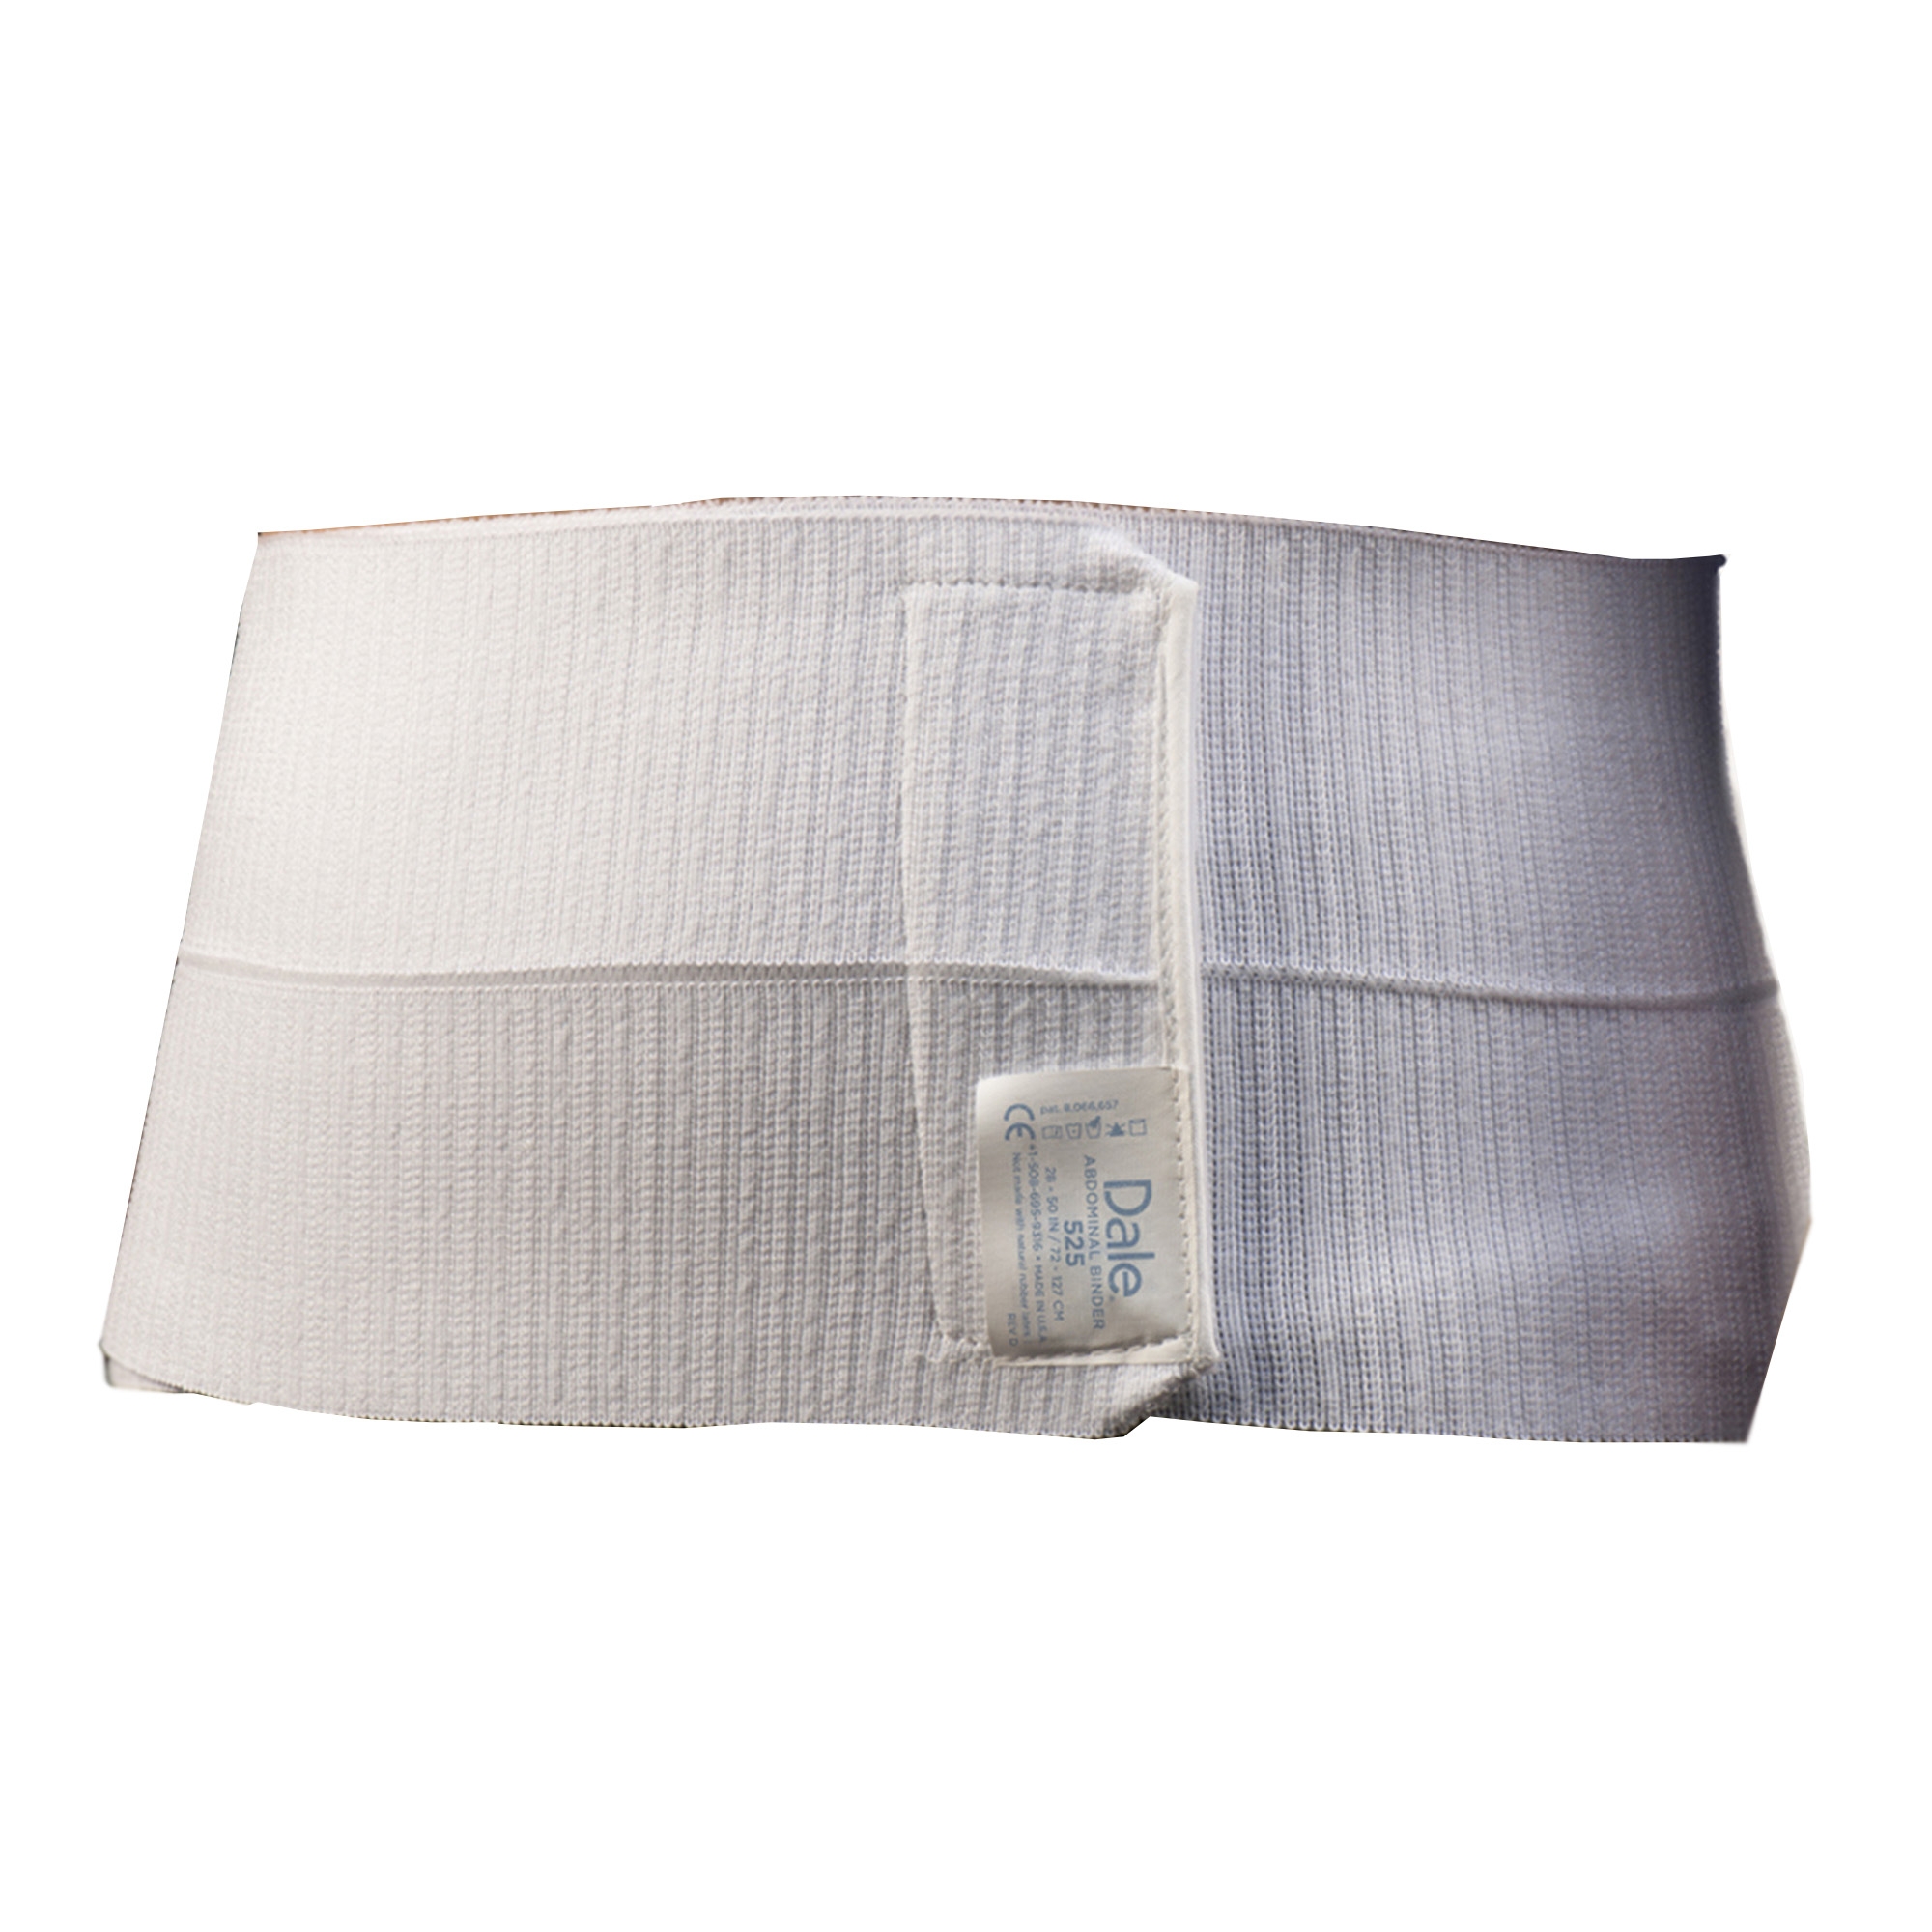 Dale 3-Panel Abdominal Binder with EasyGrip Strip for Post-Op Surgery